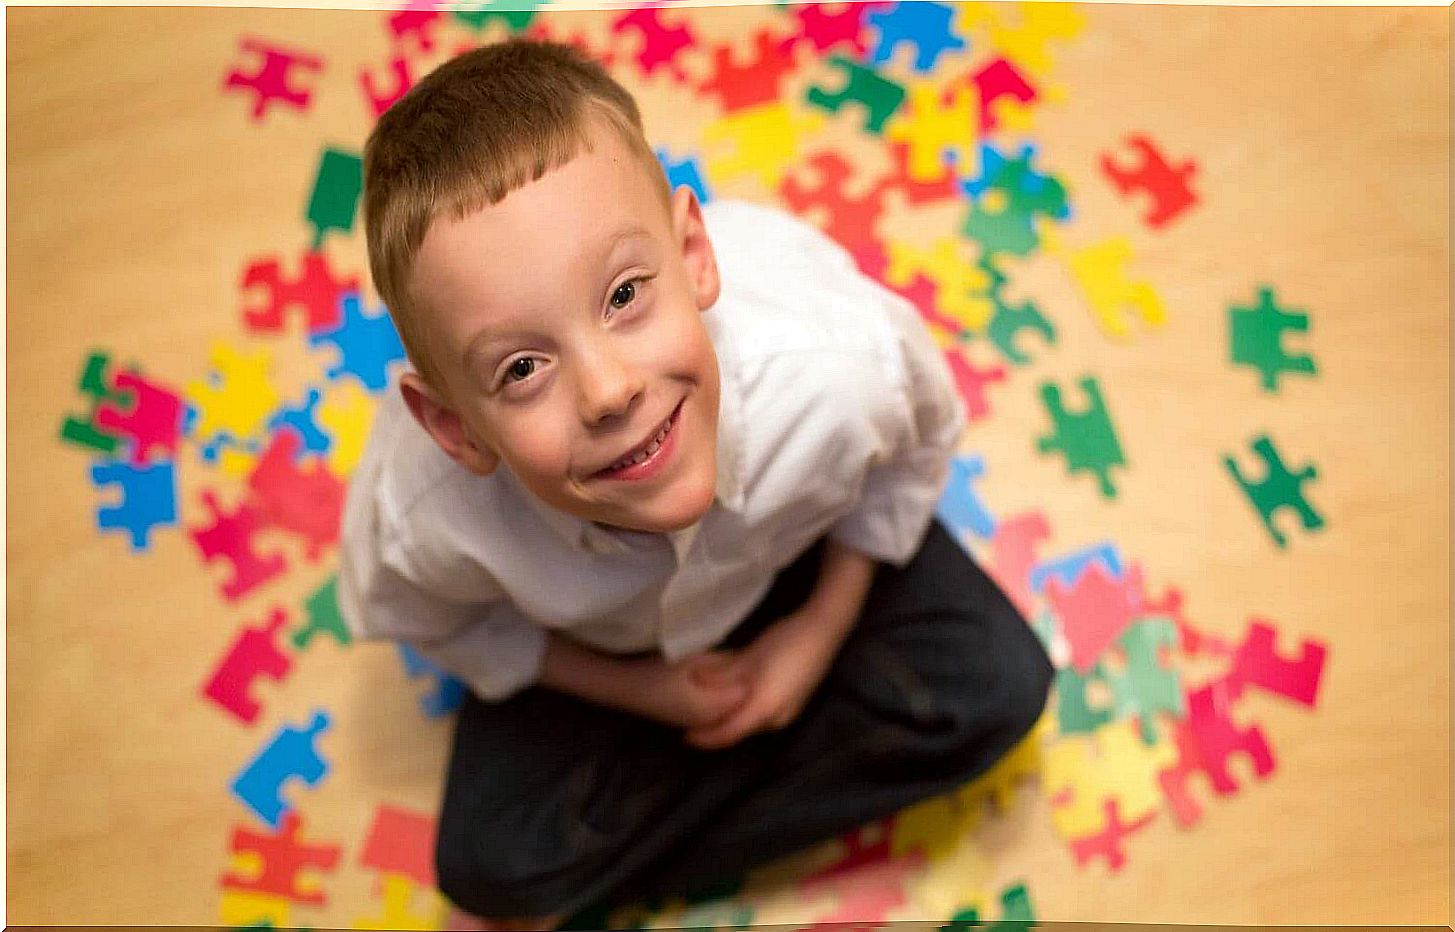 Smiling child and puzzle pieces.